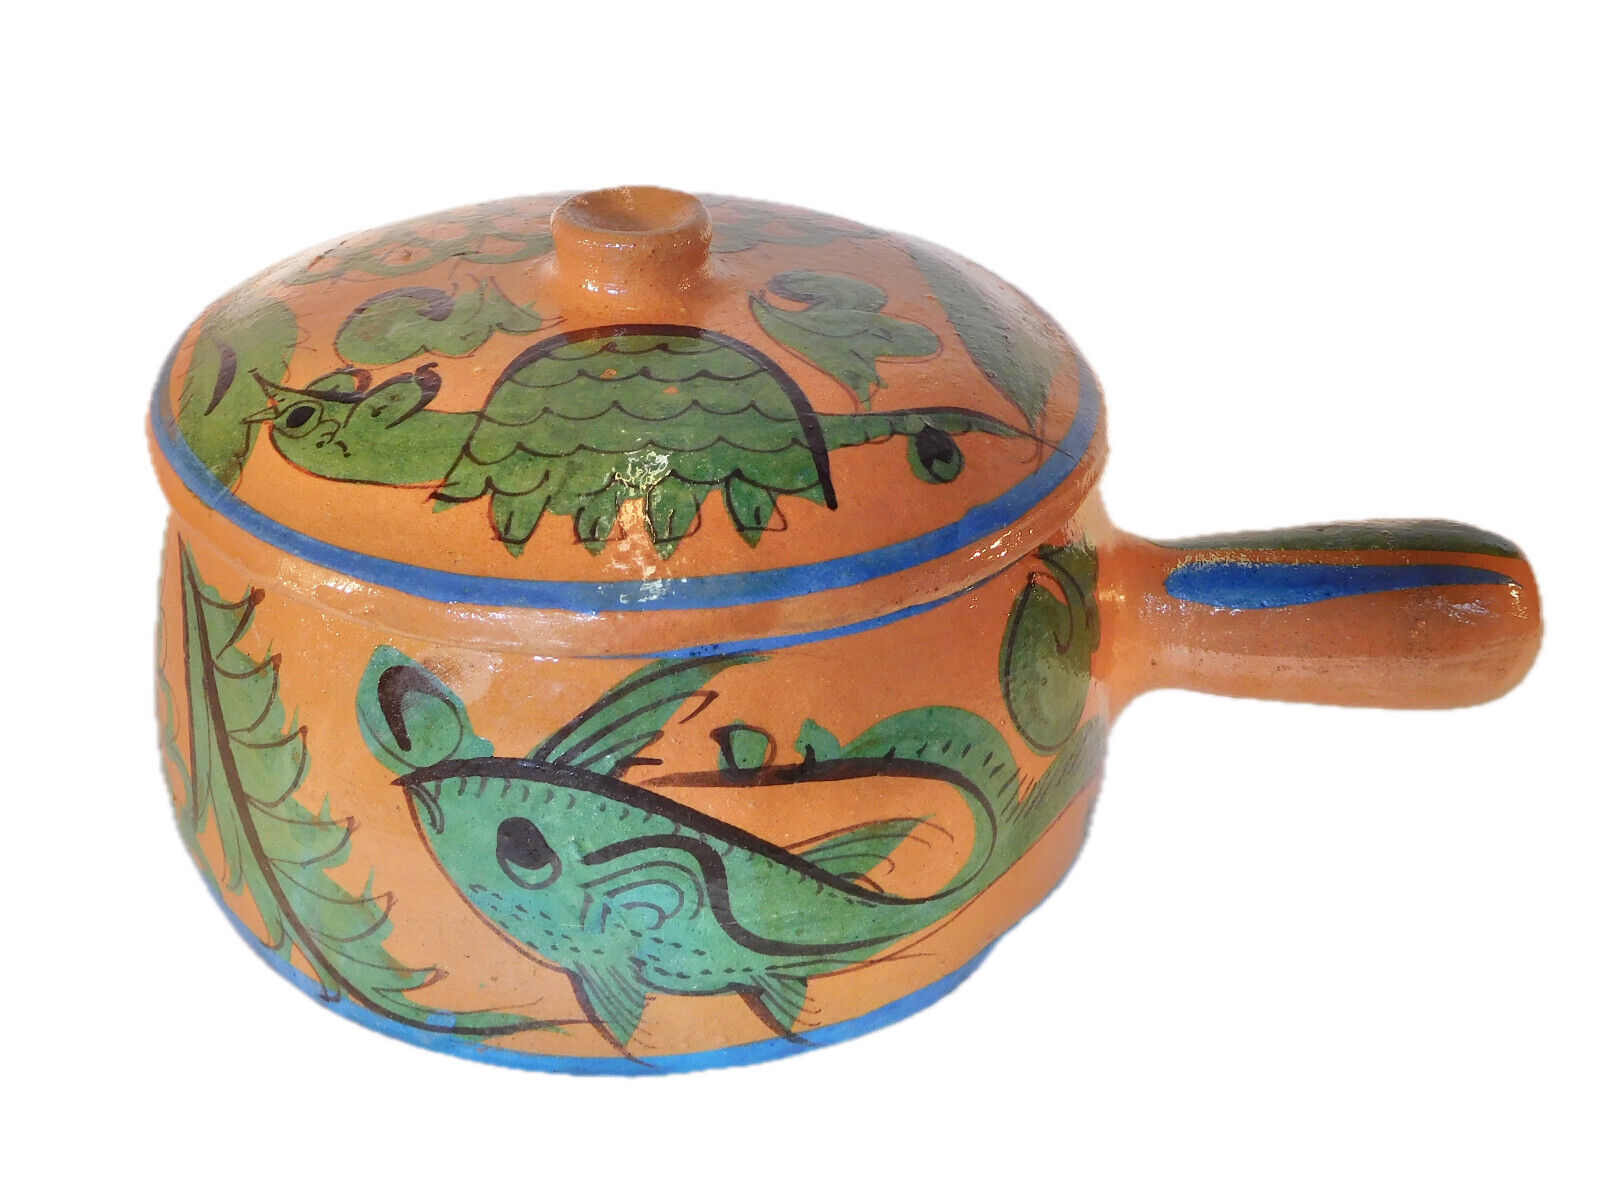 Vintage Mexican Pottery Tlaquepaque Covered Casserole Dish, Turtle & Fish